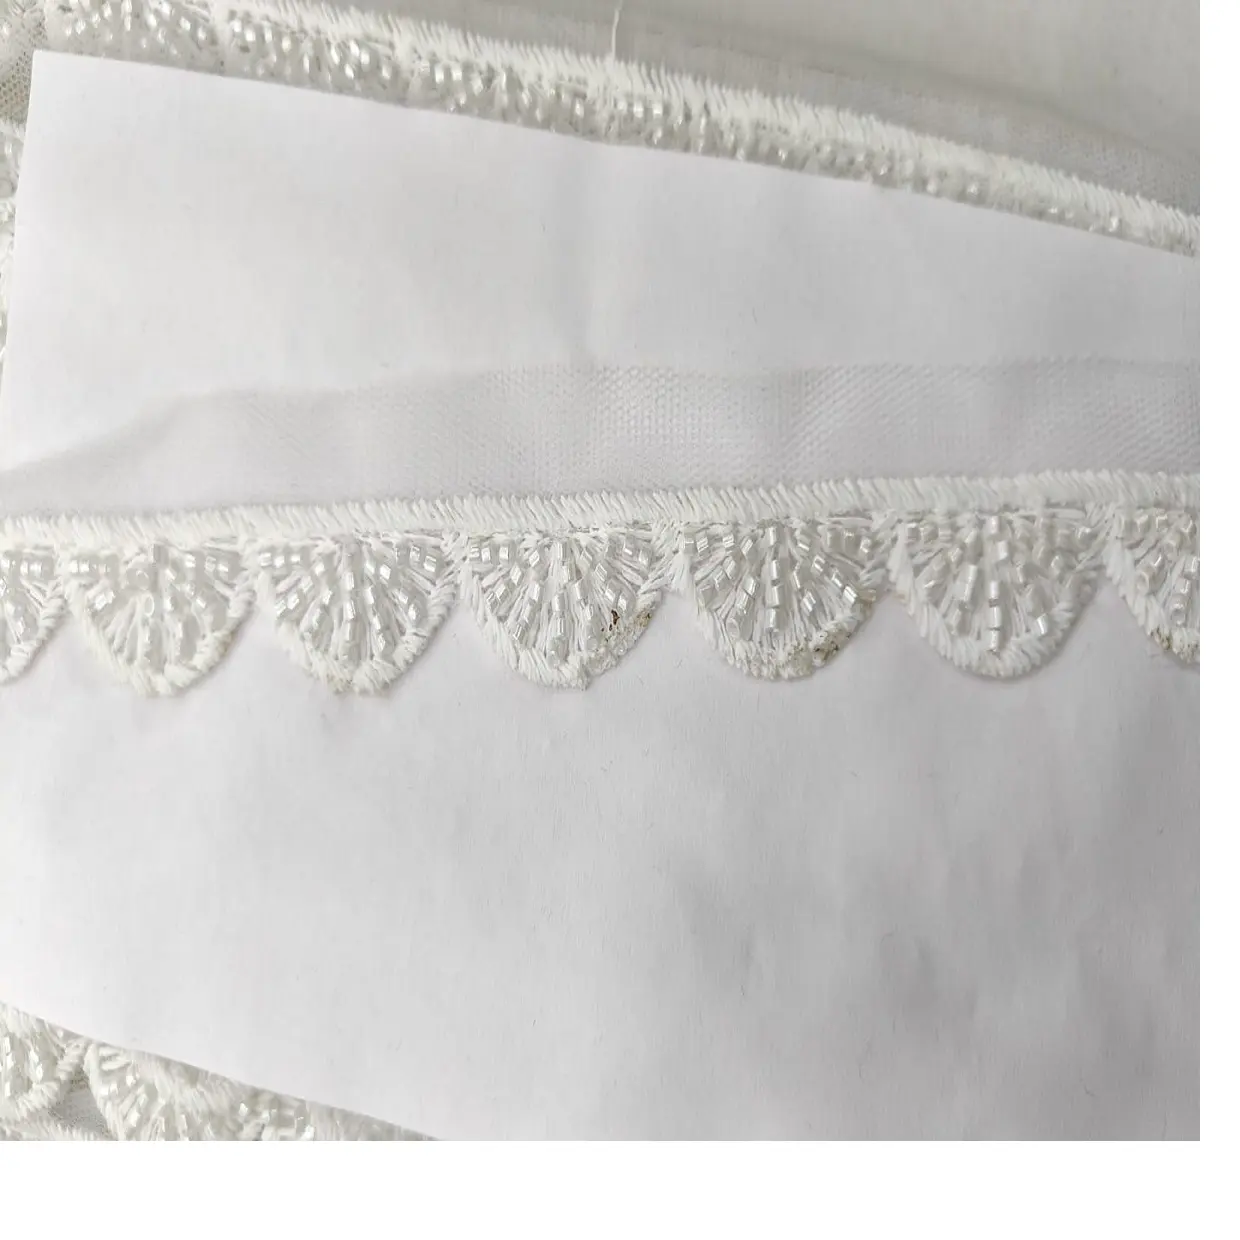 custom made in scalaping designed machine embroidered laces in various designs & in white colours for wedding dresses